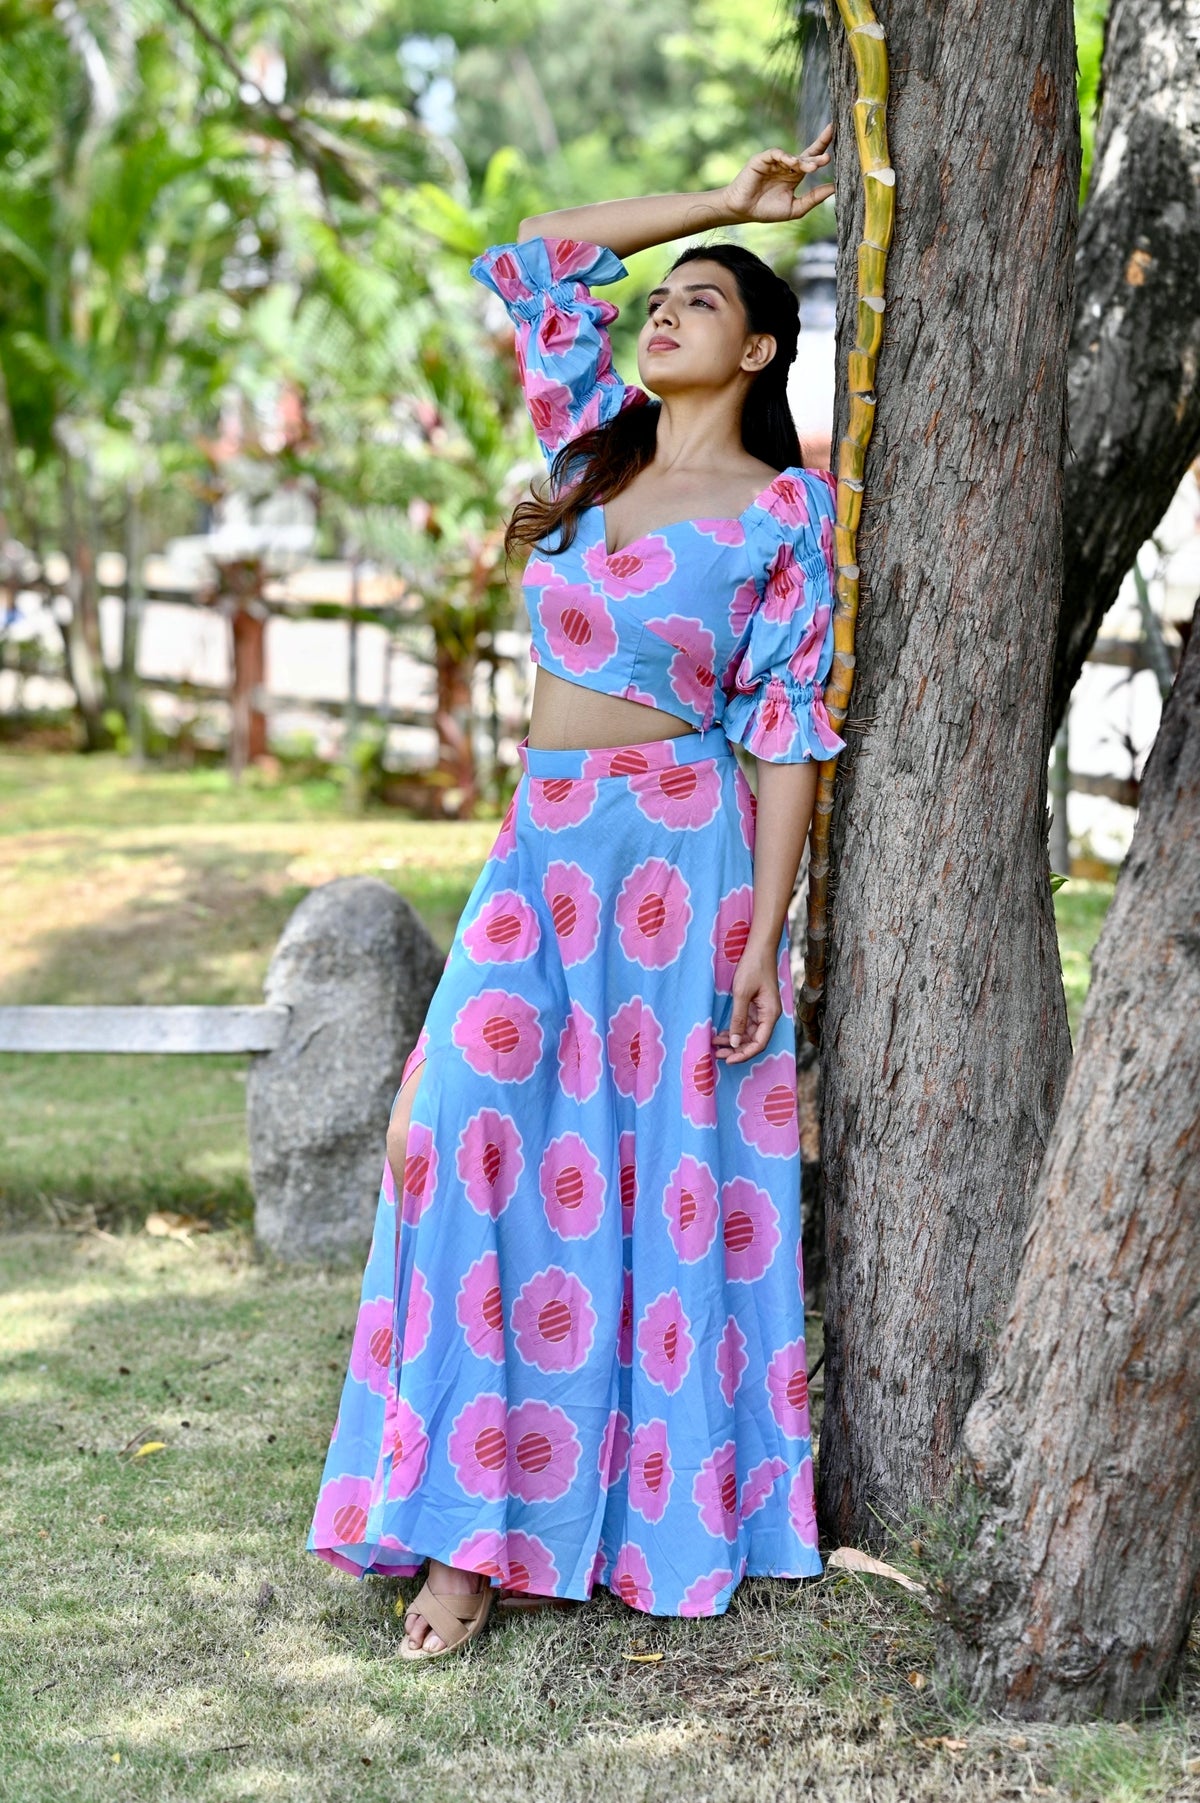 Netra floral skirt and top co-ord set